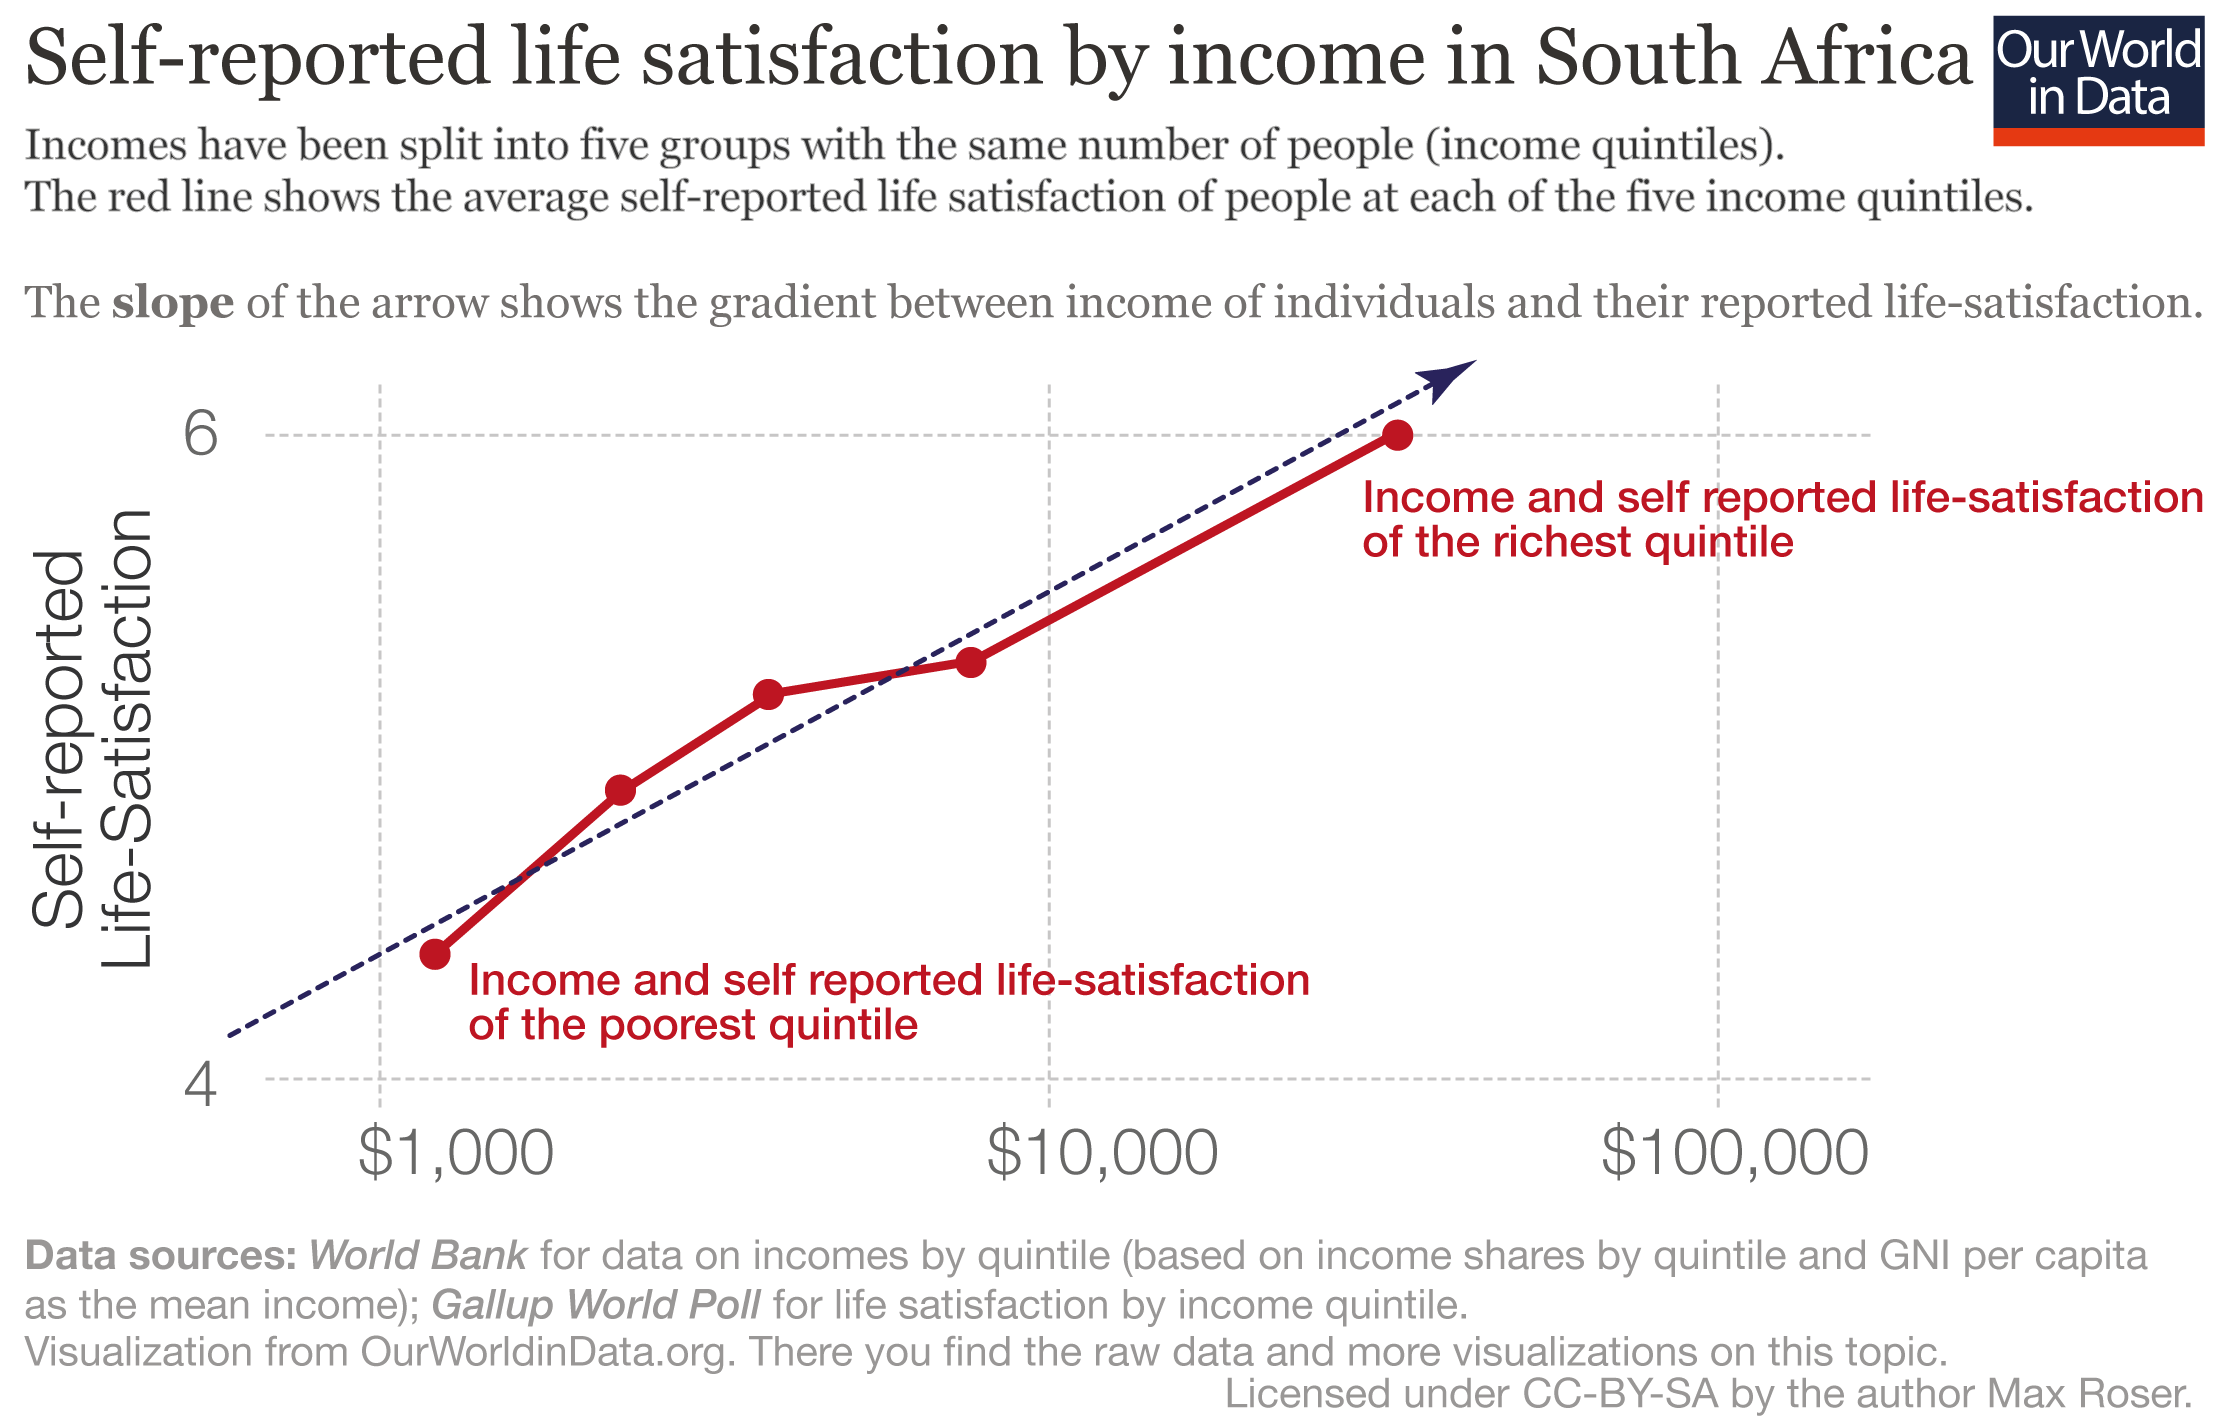 Happiness and Life Satisfaction - Our World in Data